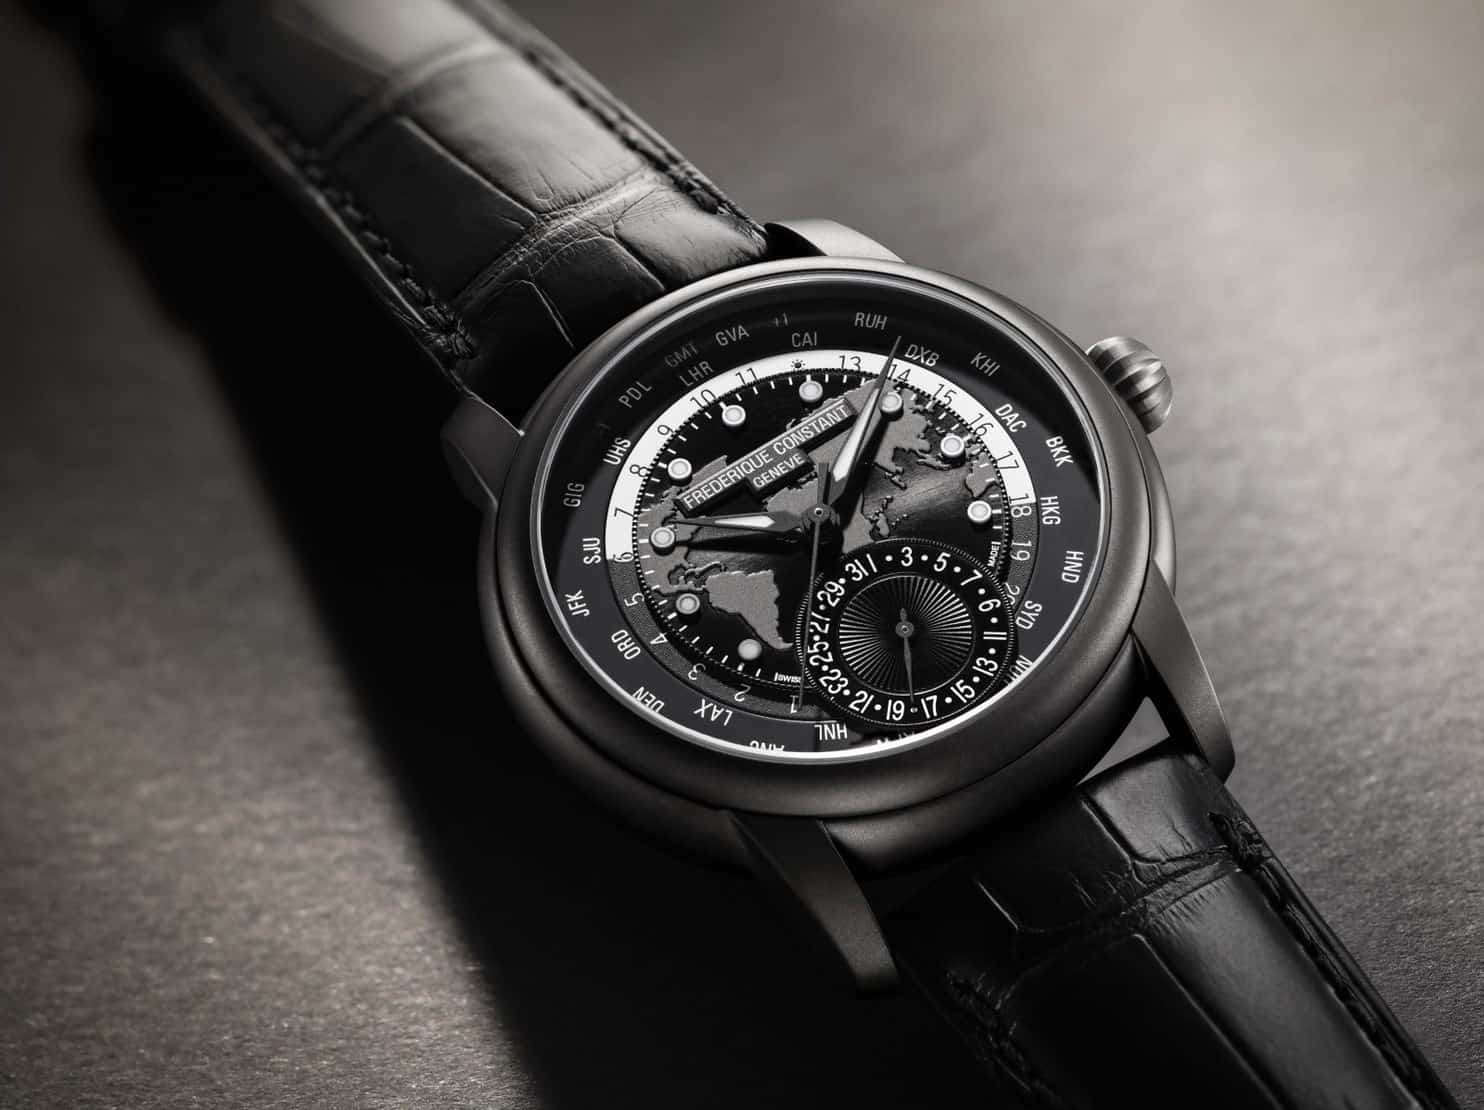 Frederique Constant Rings in Black Friday with the All Black Classics Worldtimer Manufacture Globetrotter Limited Edition